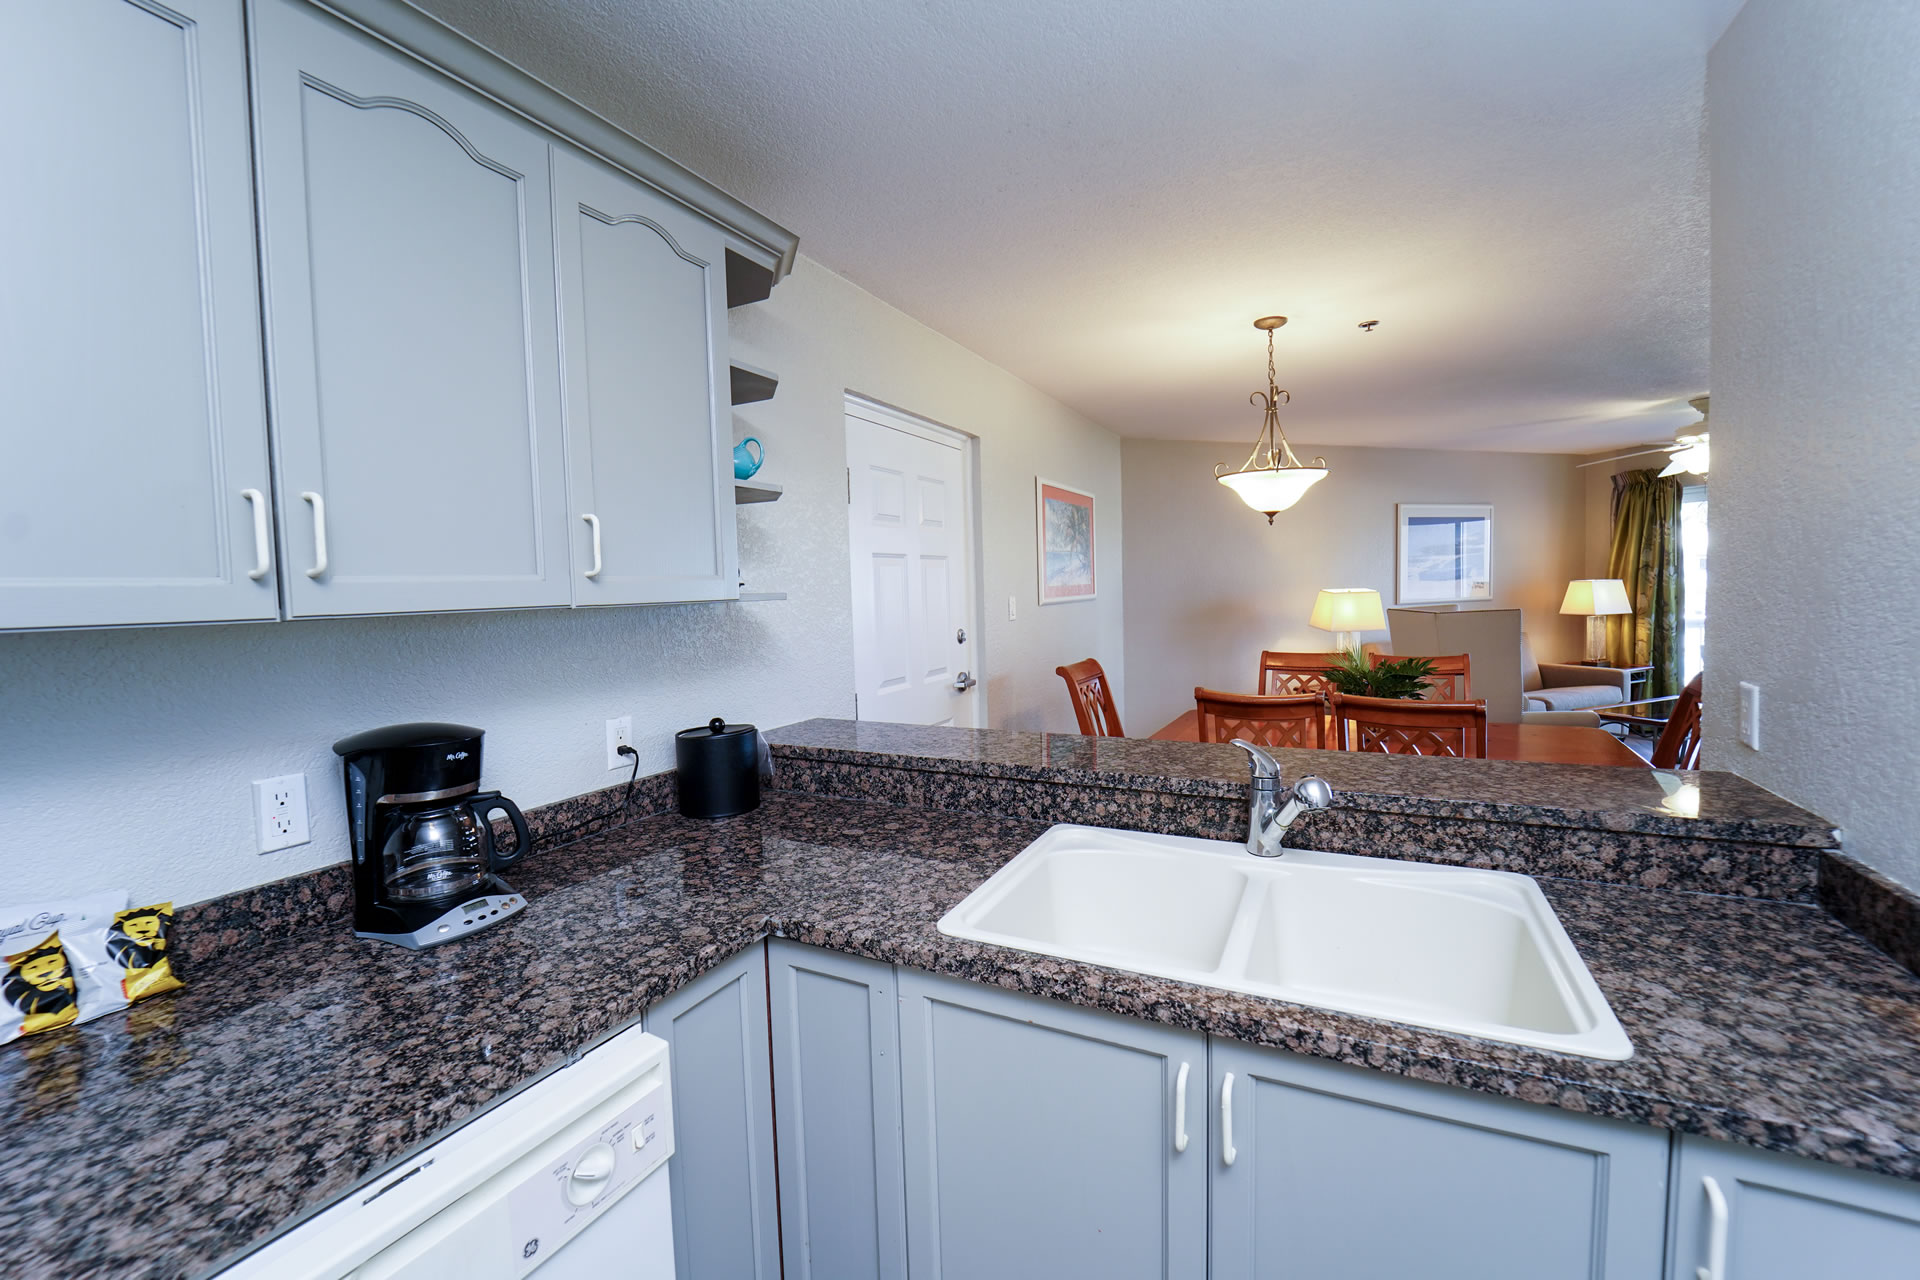 Kitchen area and dining room table in the One Bedroom King Suite at the Grand Caymanian Resort.